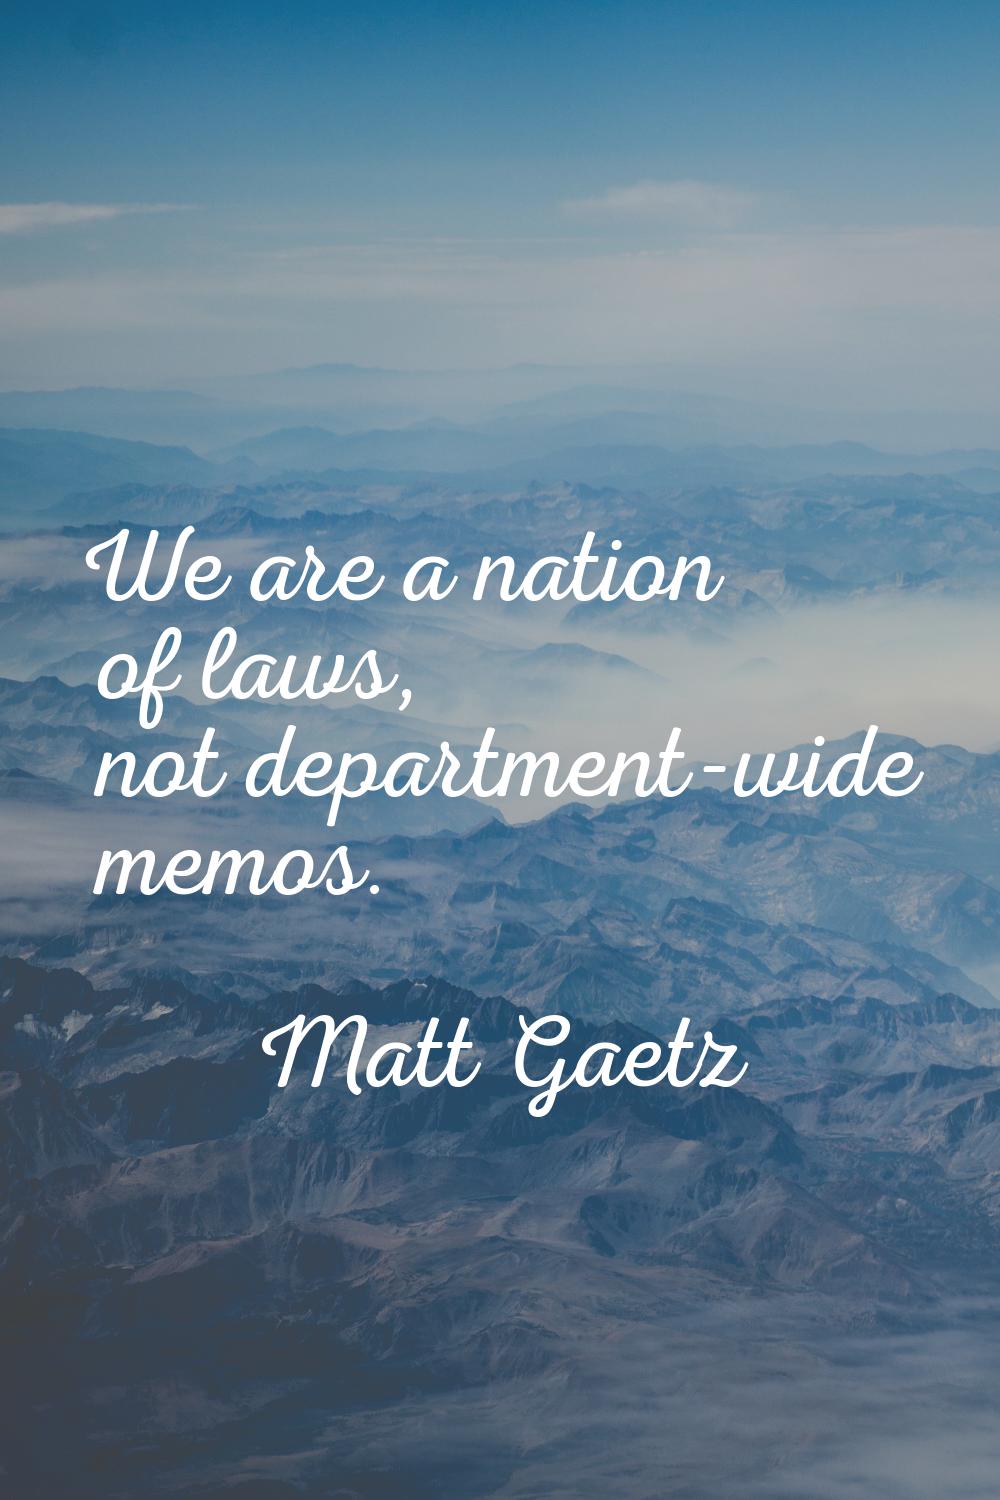 We are a nation of laws, not department-wide memos.